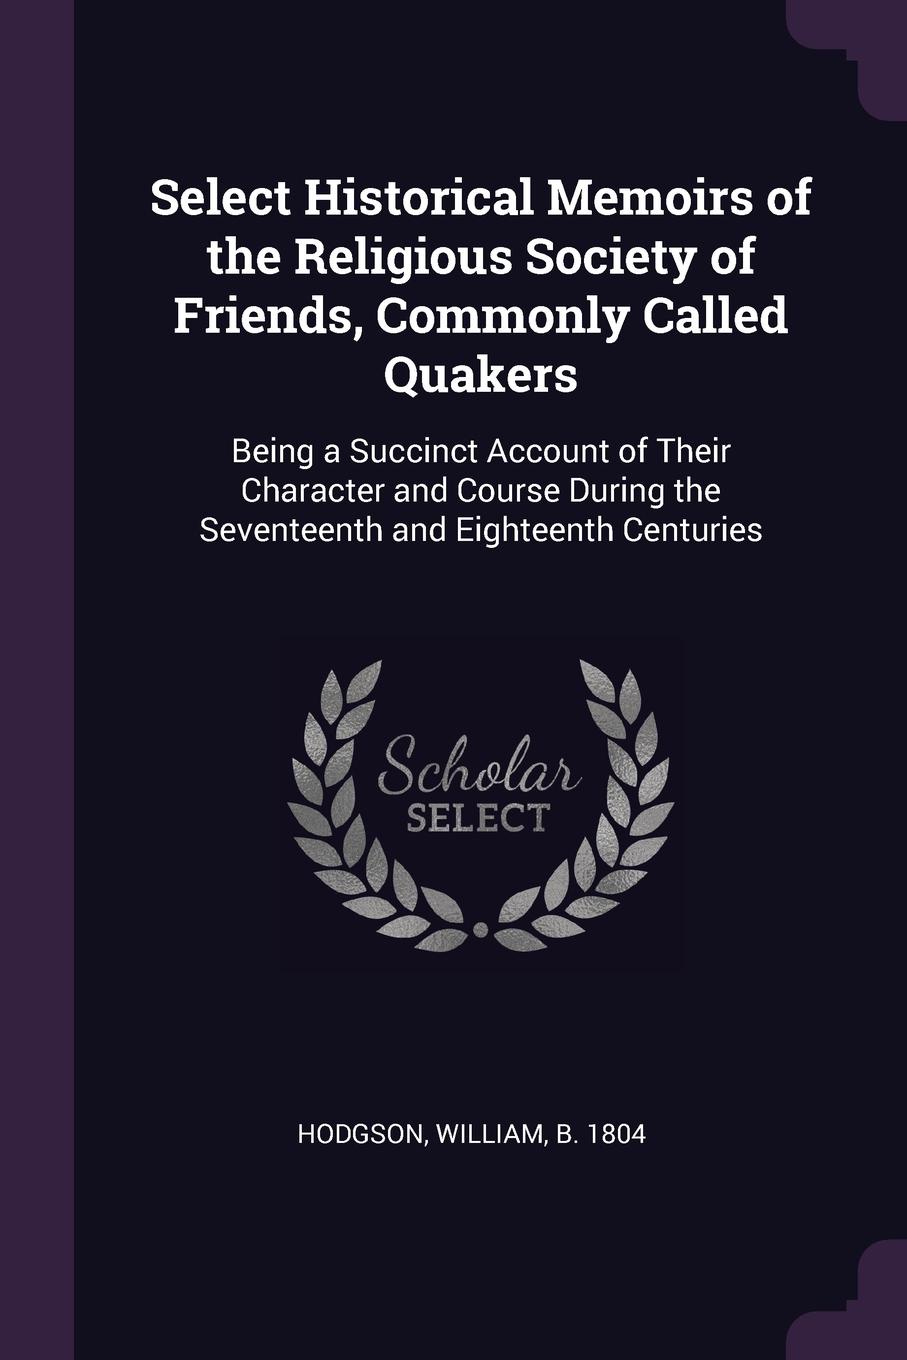 Select Historical Memoirs of the Religious Society of Friends, Commonly Called Quakers. Being a Succinct Account of Their Character and Course During the Seventeenth and Eighteenth Centuries